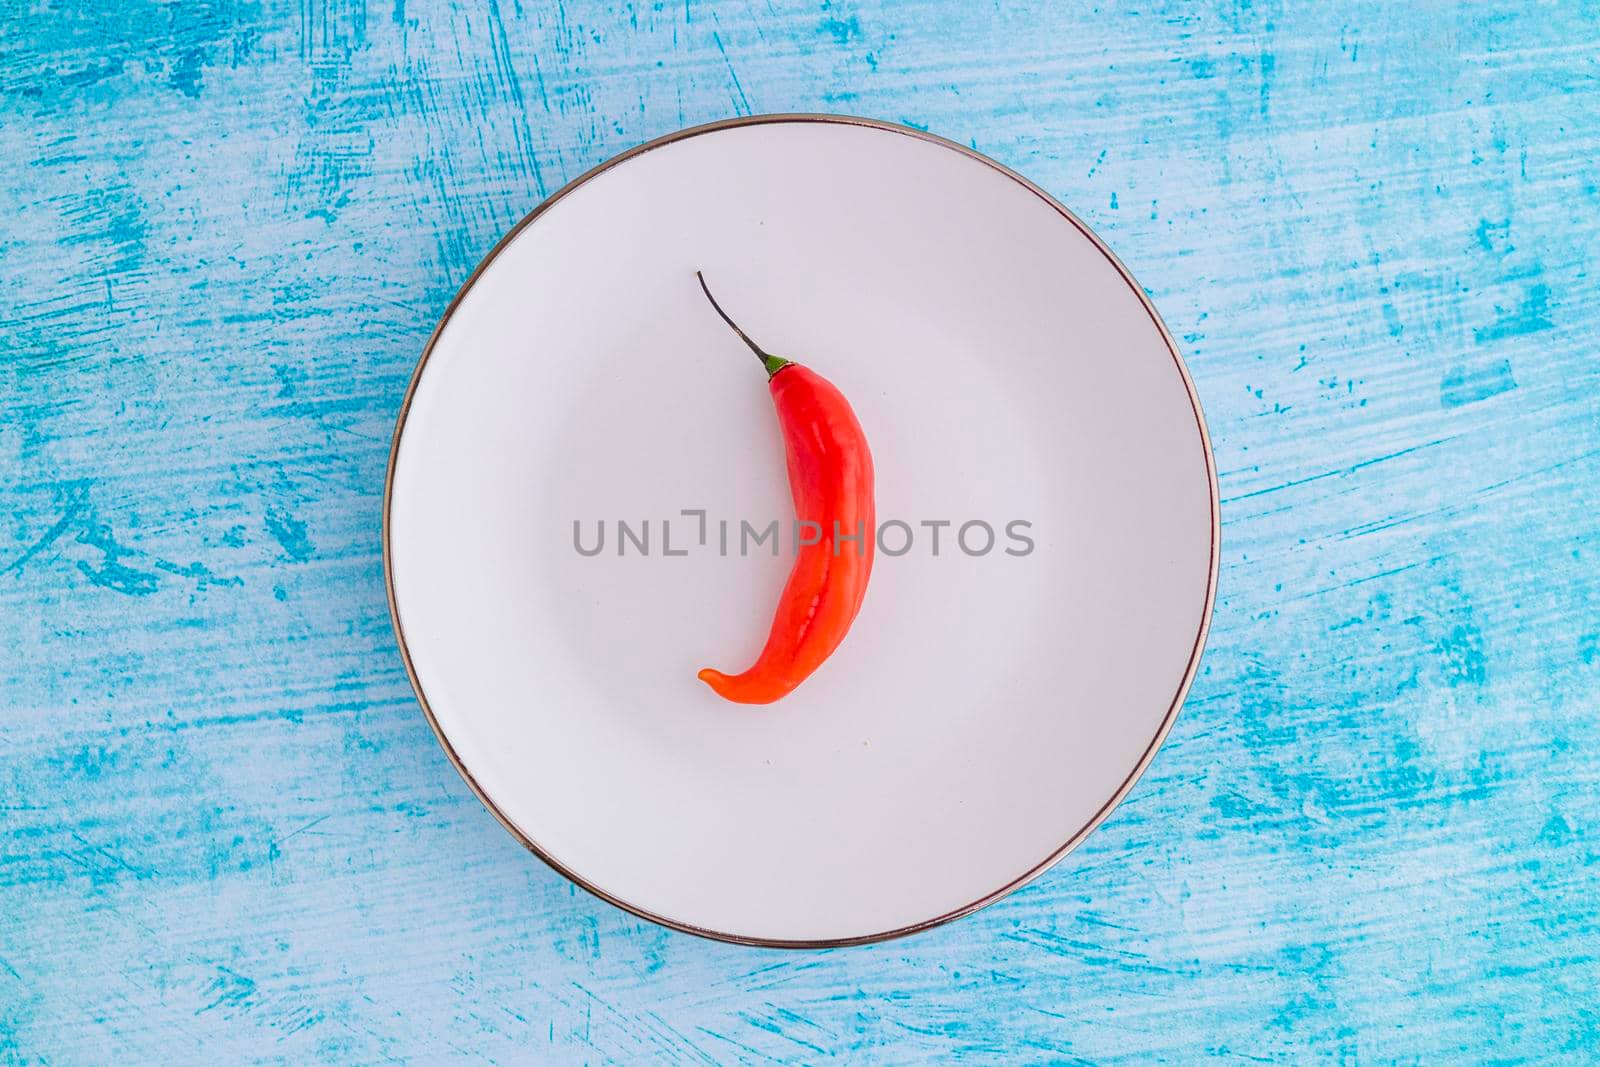 Presentation of the Peruvian red hot chili (Ají Limo) in a colored plate by eagg13